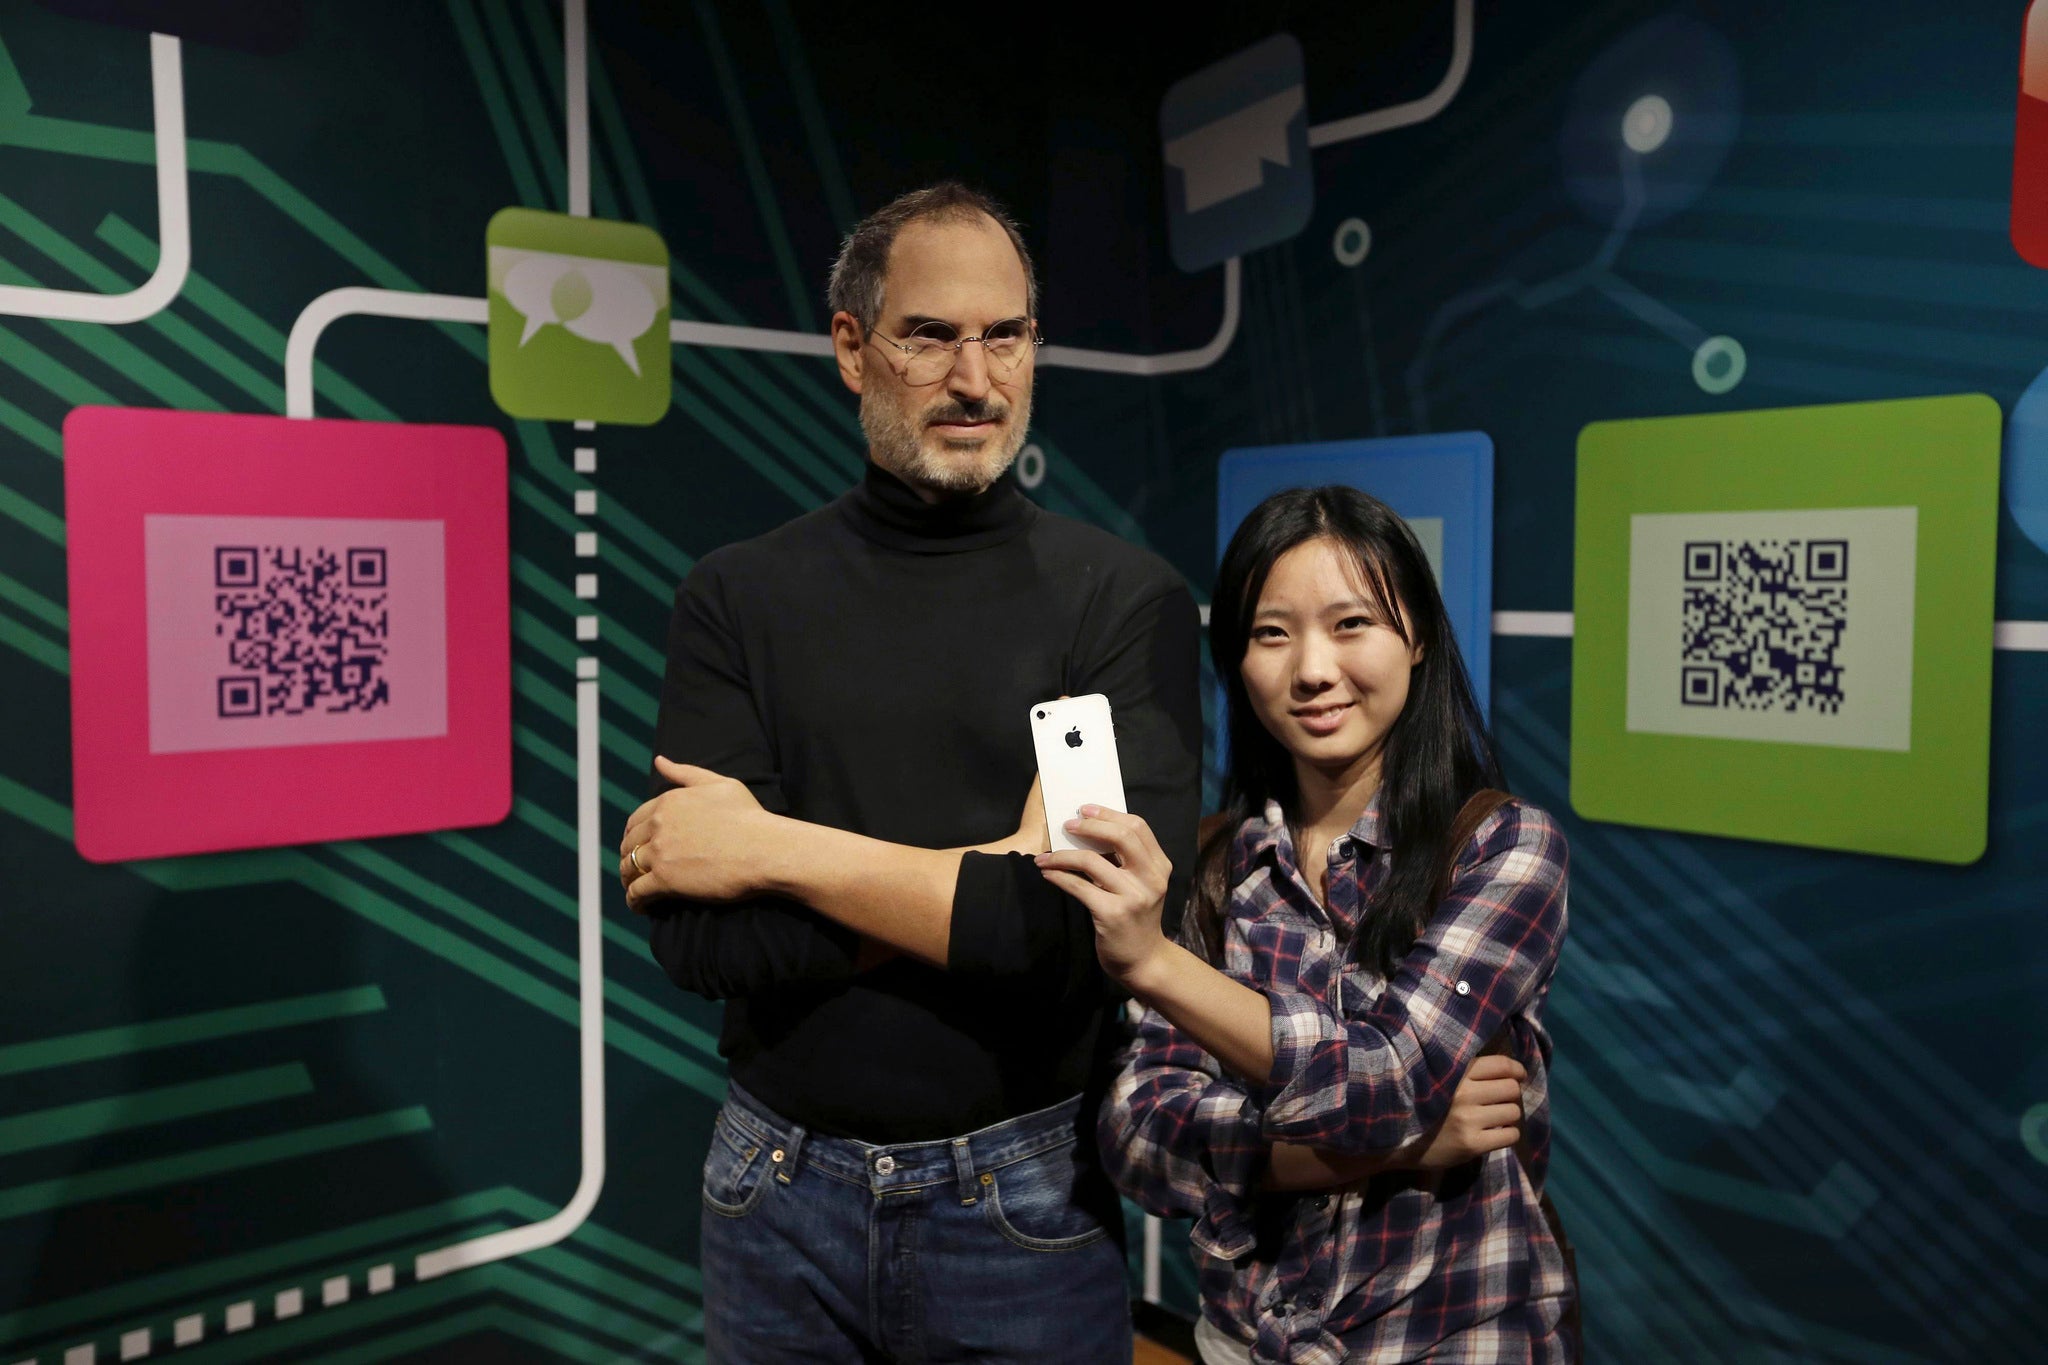 A woman poses for photographs with an iPhone next to a wax figure of Apple's co-founder Steve Jobs during a preview visit at a Madame Tussauds Museum in Wuhan, China.